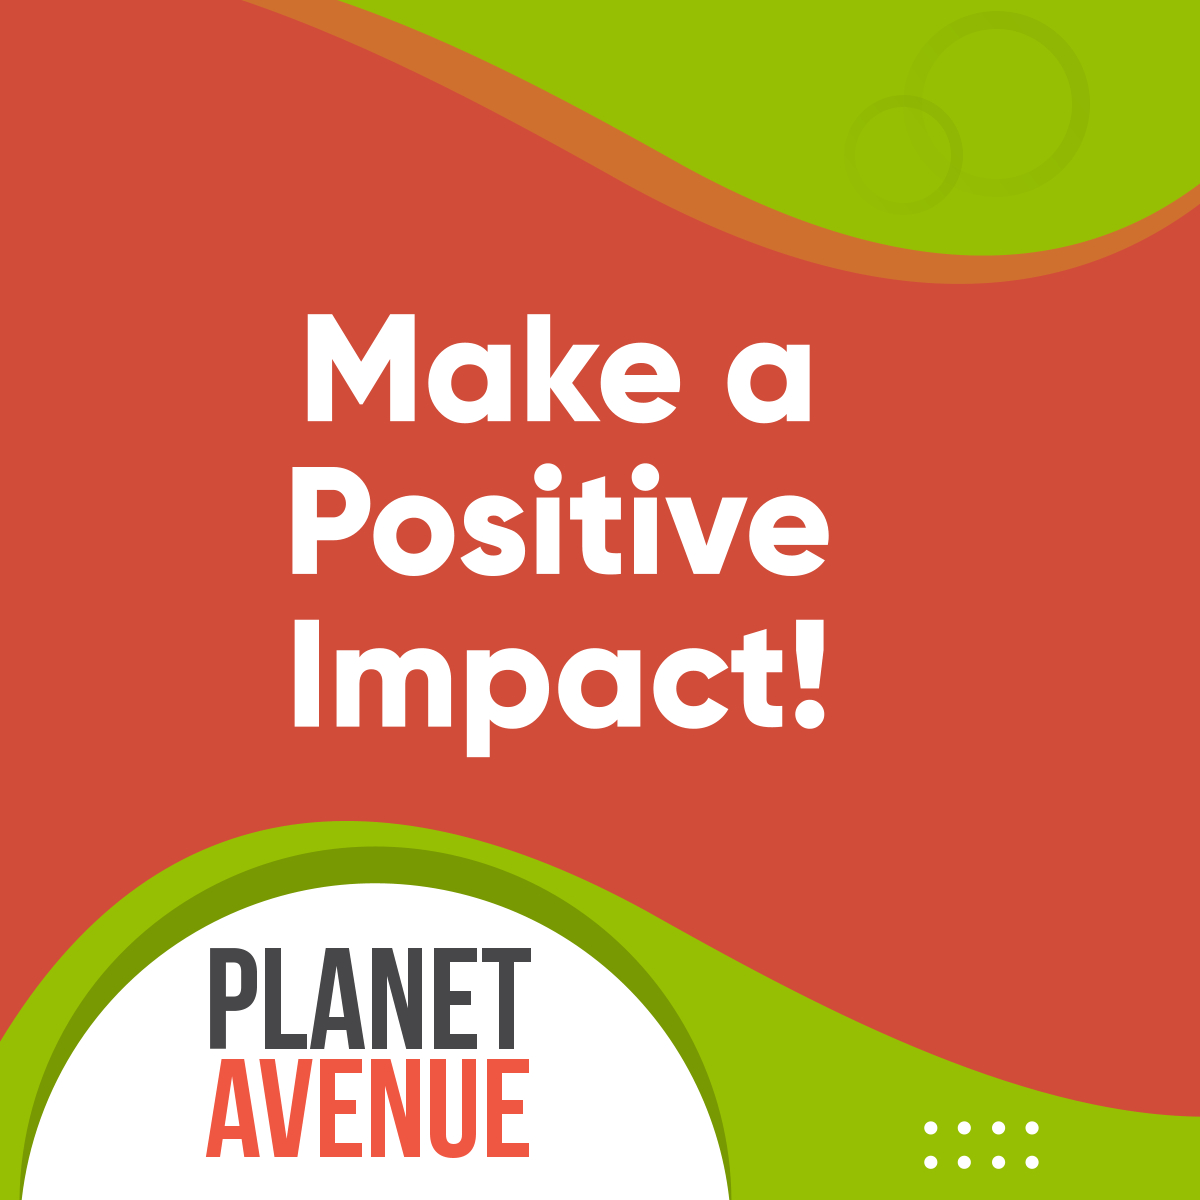 Visit The Planet Avenue today and shop our collection of eco-friendly and sustainable products. Join us in making a positive impact on the planet, one purchase at a time.

#Shop #ThePlanetAvenue #EcoFriendly #SustainableProducts